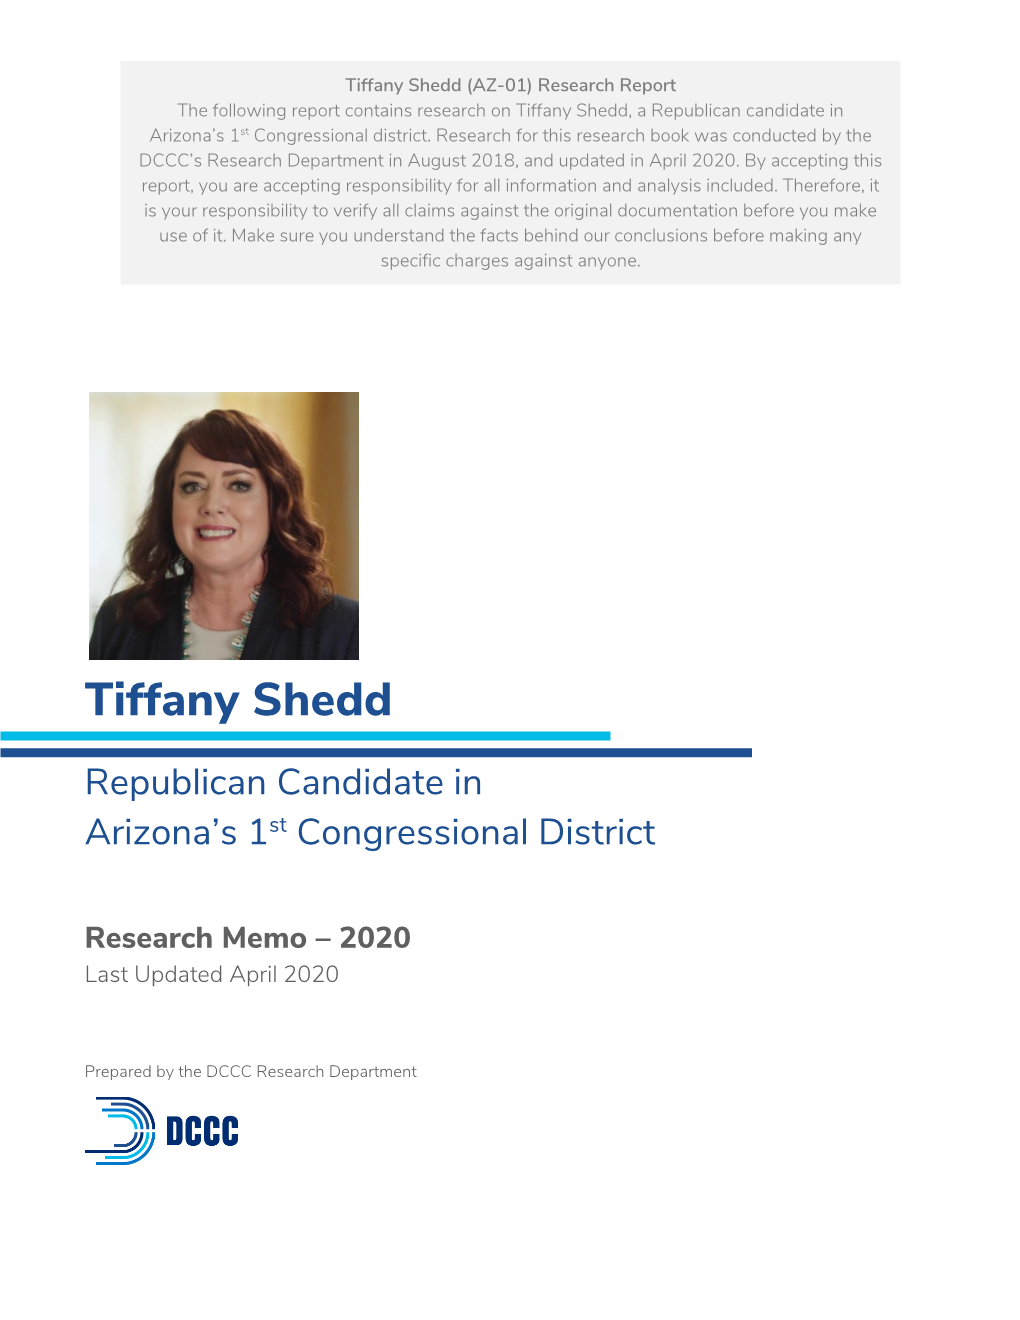 Tiffany Shedd (AZ-01) Research Report the Following Report Contains Research on Tiffany Shedd, a Republican Candidate in Arizona’S 1St Congressional District